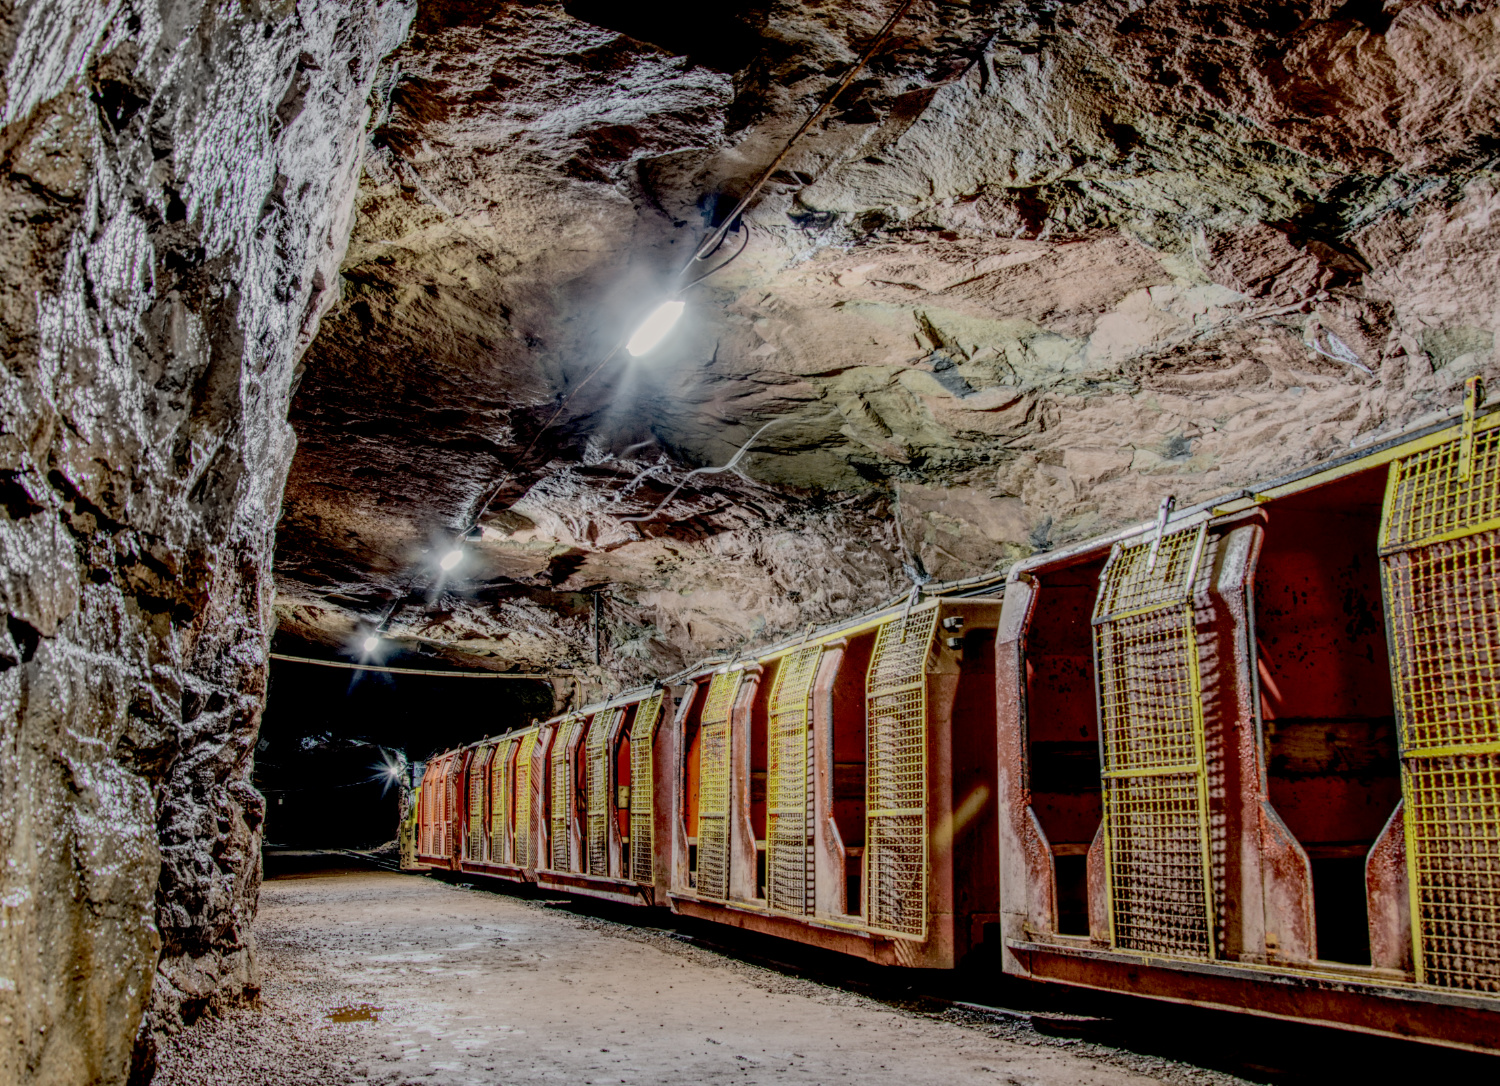 This train takes us deeper into the visitor mine Kleinenbremen